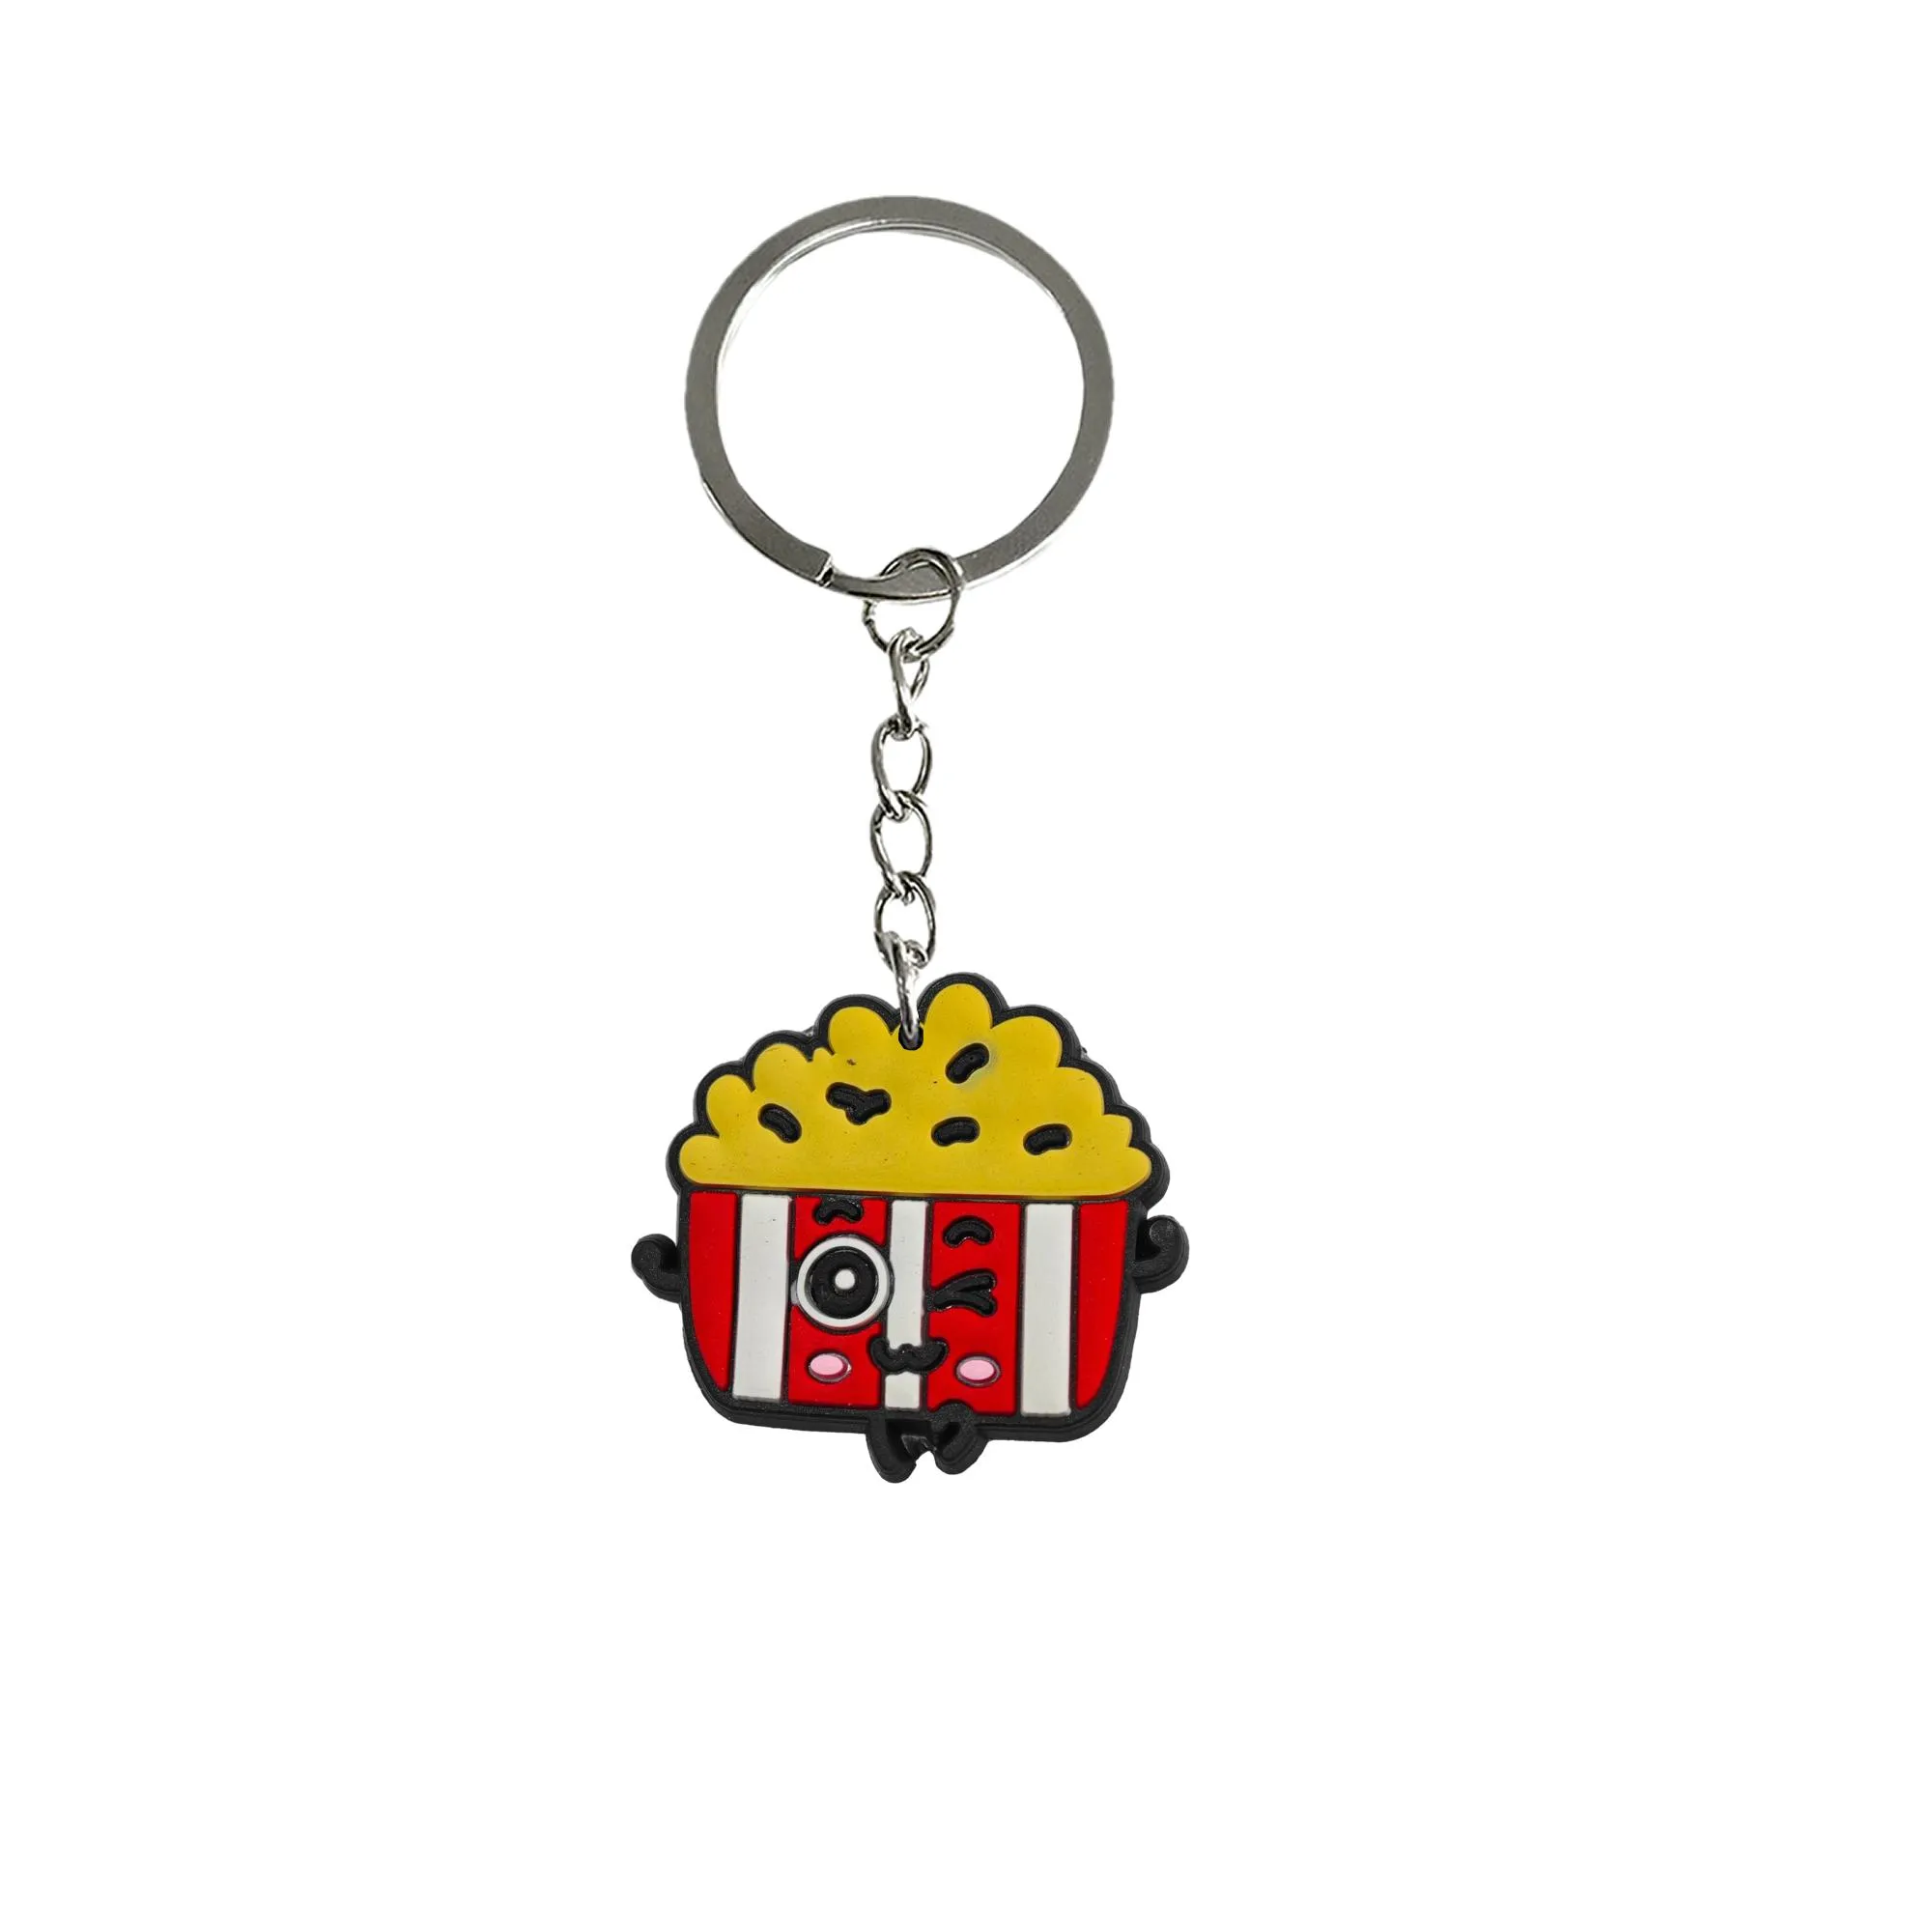 food keychain for birthday christmas party favors gift boys keychains key ring girls keyring suitable schoolbag mini cute classroom prizes tags goodie bag stuffer gifts chain fans